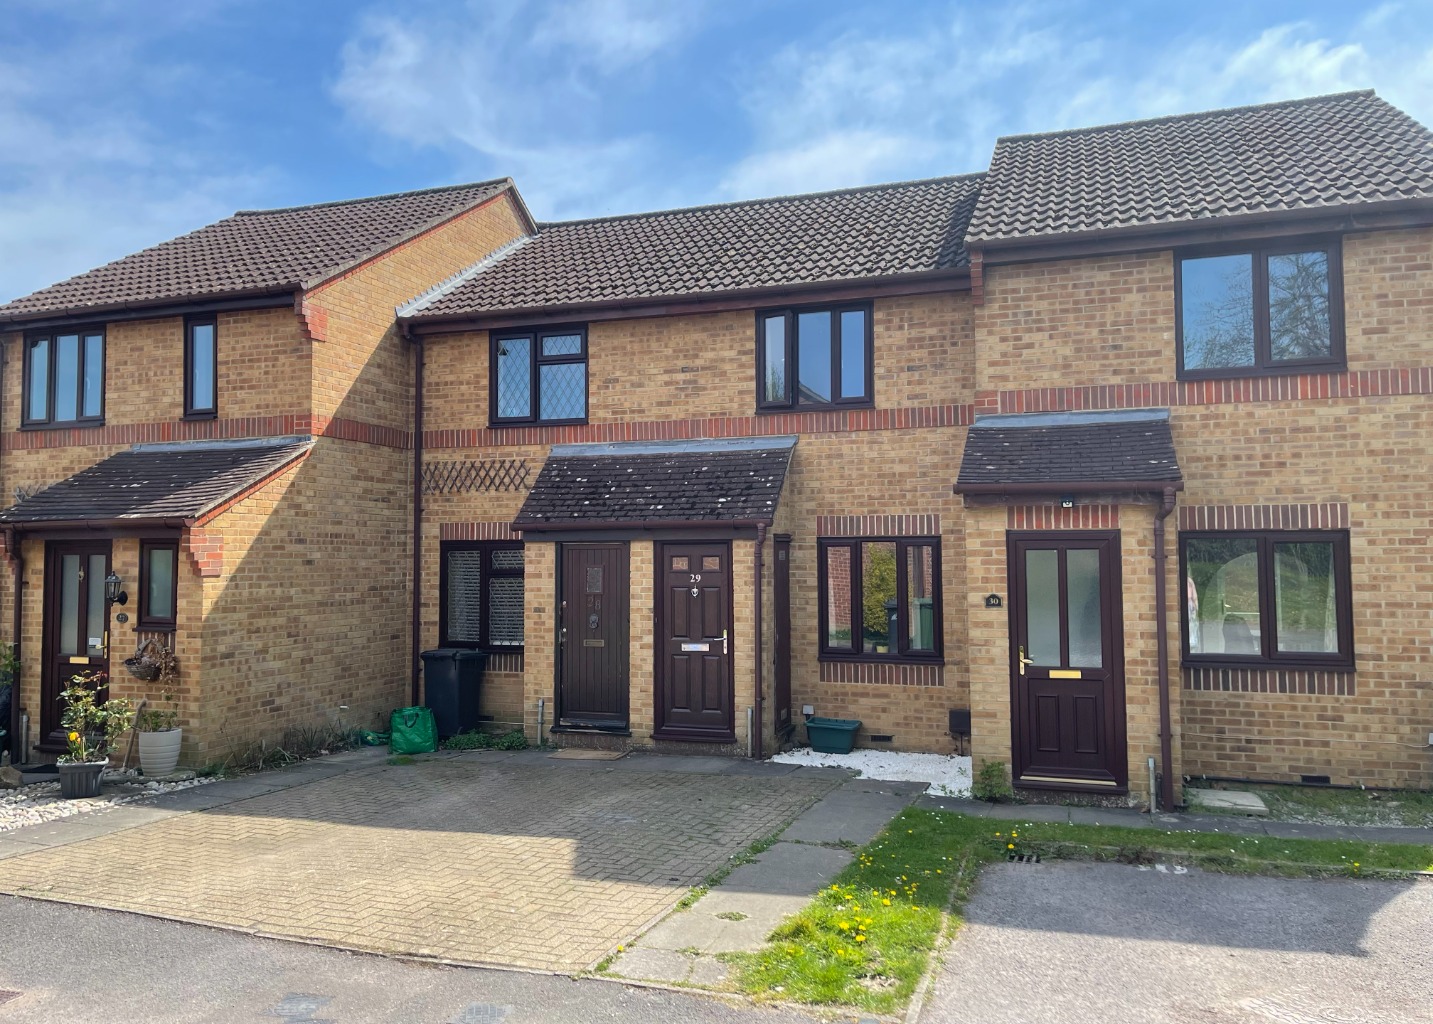 2 bed terraced house for sale in Southlands, Basingstoke, RG24